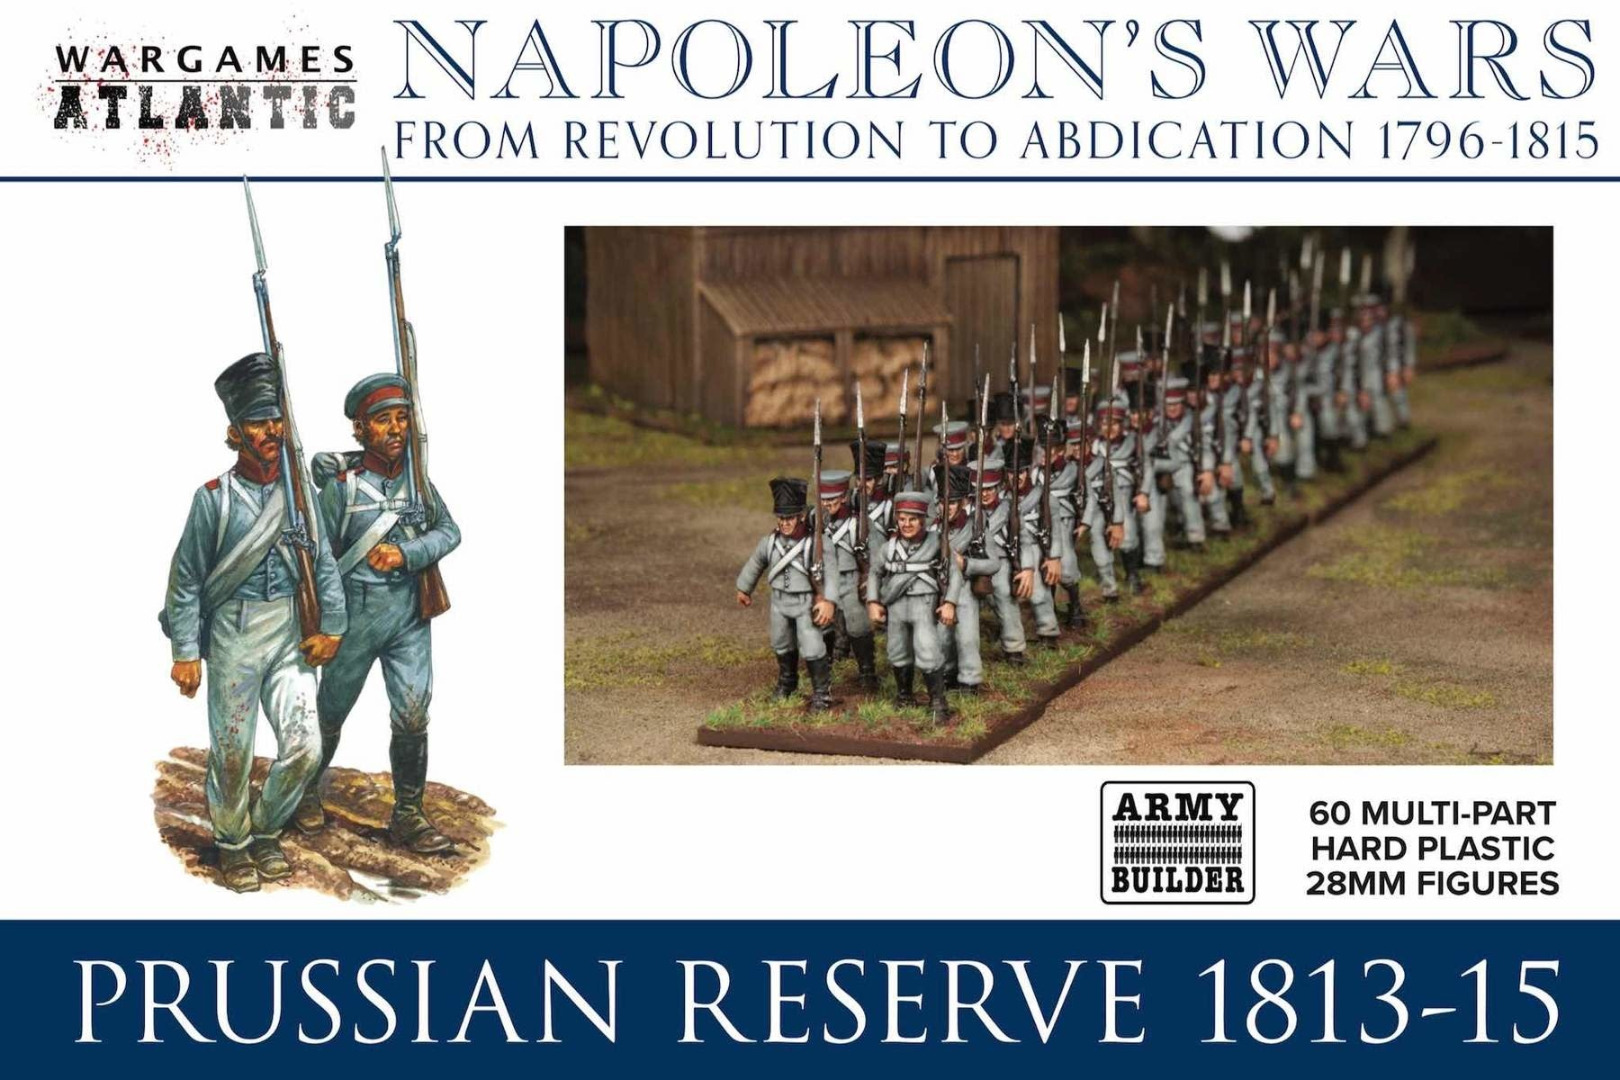 Napoleon's Wars - Prussian Reserve 1813 - 1815 Army Builder Set (English)